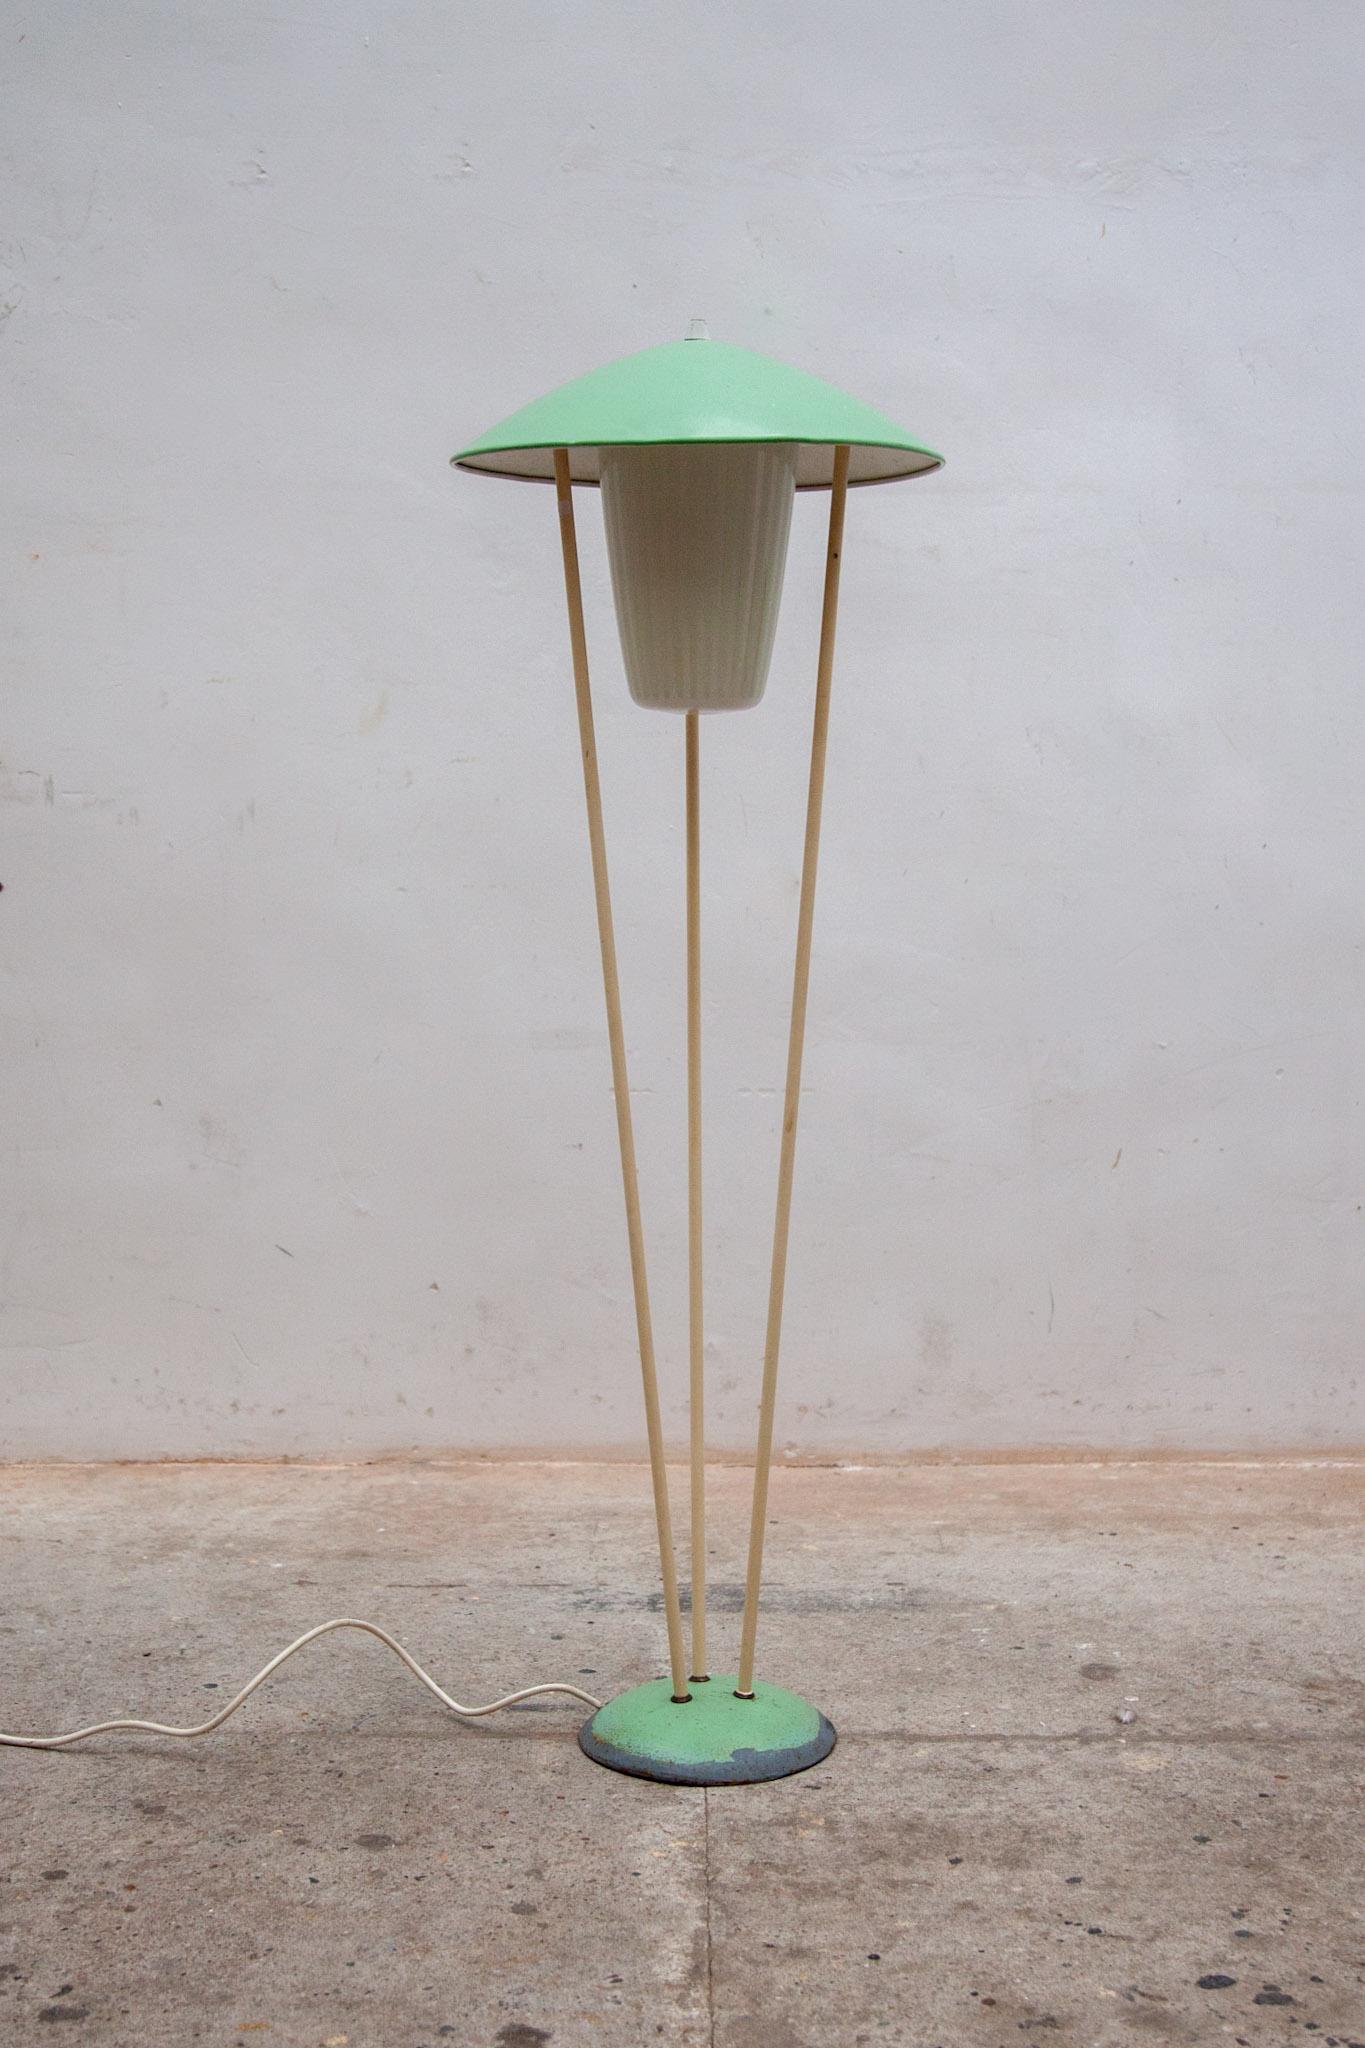 Floor-lamp 1958 by the BEGA brand that can be used both indoors and outdoors. These kind of lamp was popular to use at patio's, mini golf courses and other public places. The lamp is in beautiful vintage condition and the glass shade is still fully